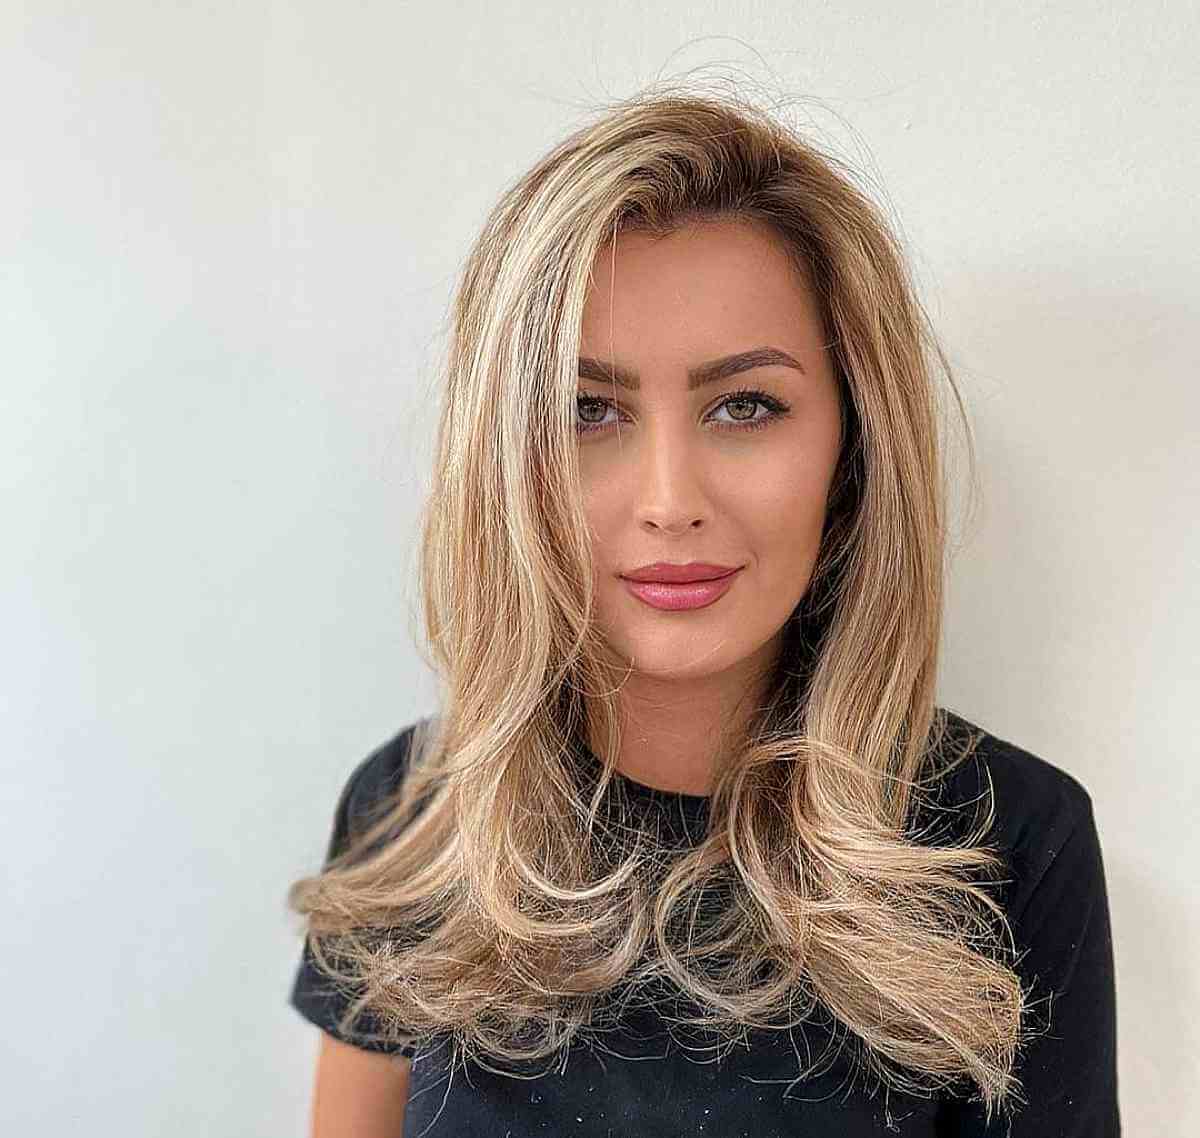 Medium-Long Blonde Hair with a Side Part 